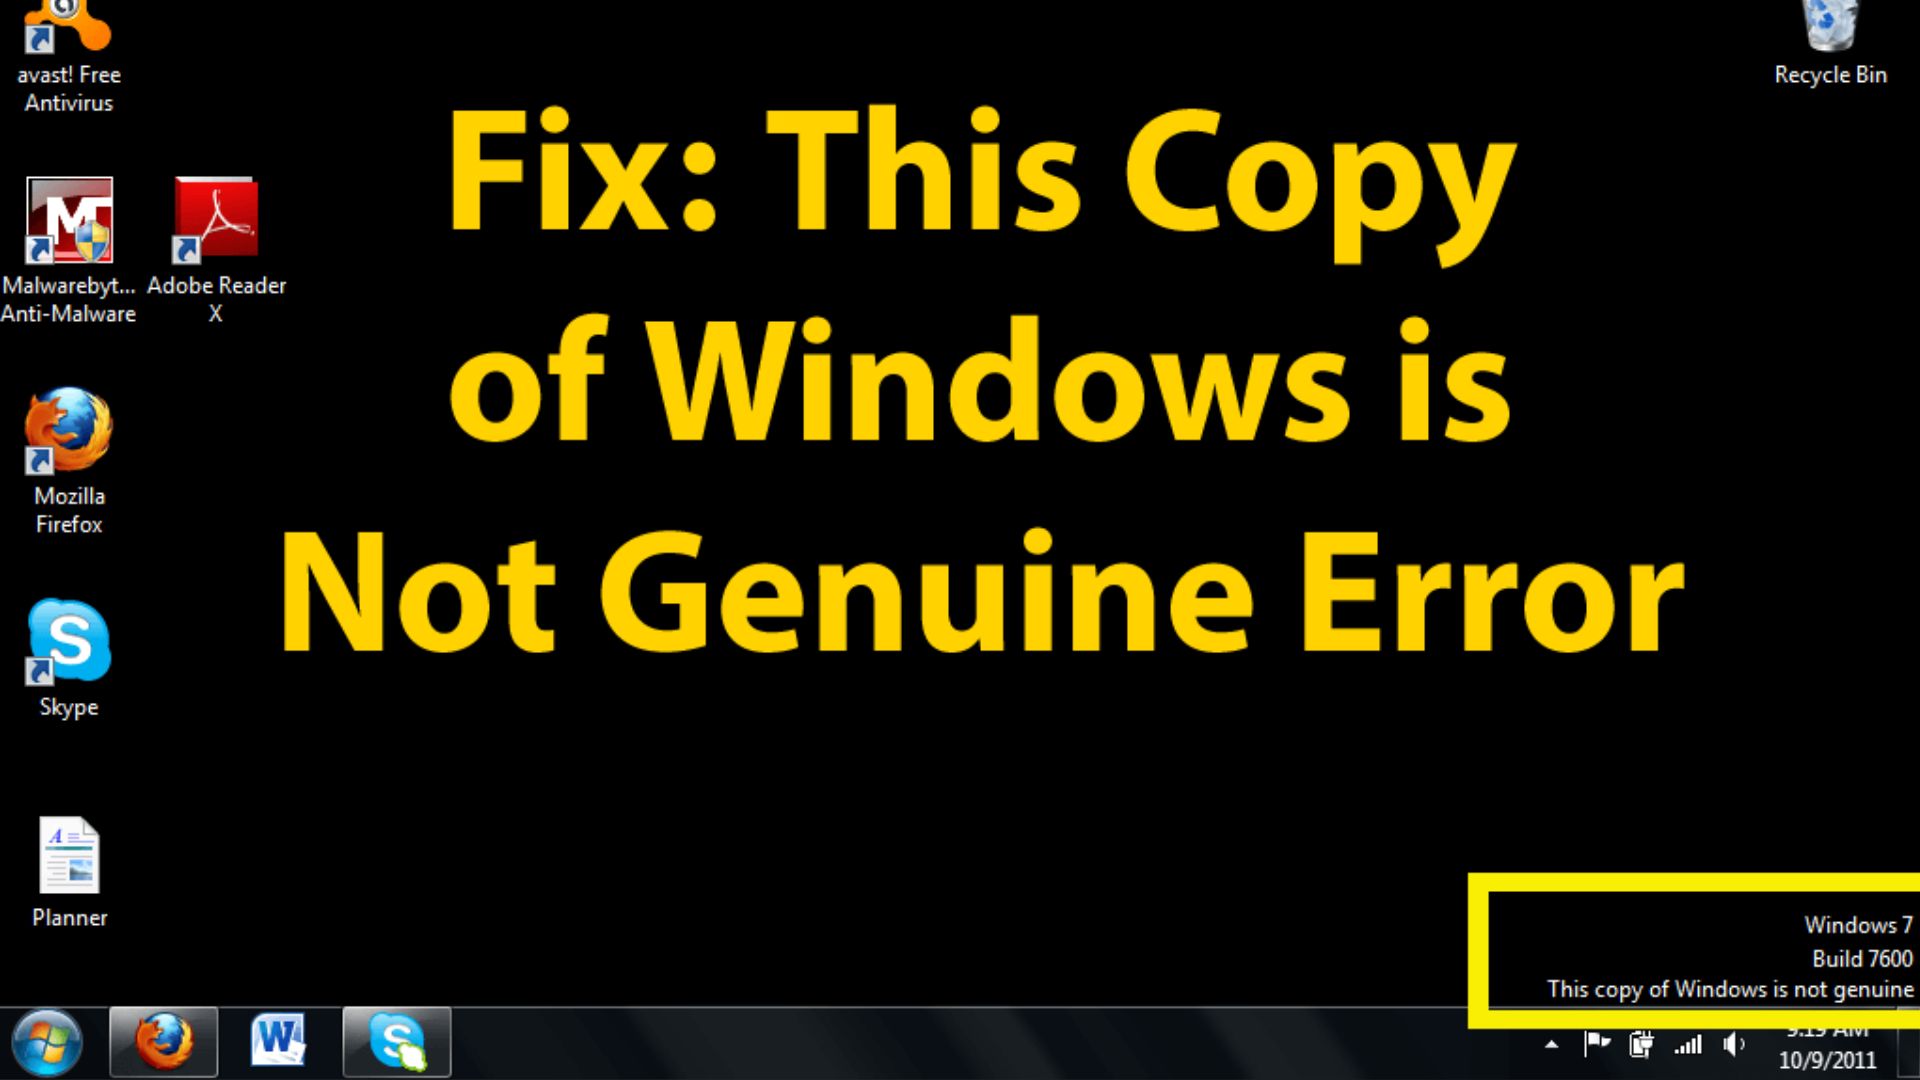 windows 7 build 7601 this copy of windows is not genuine